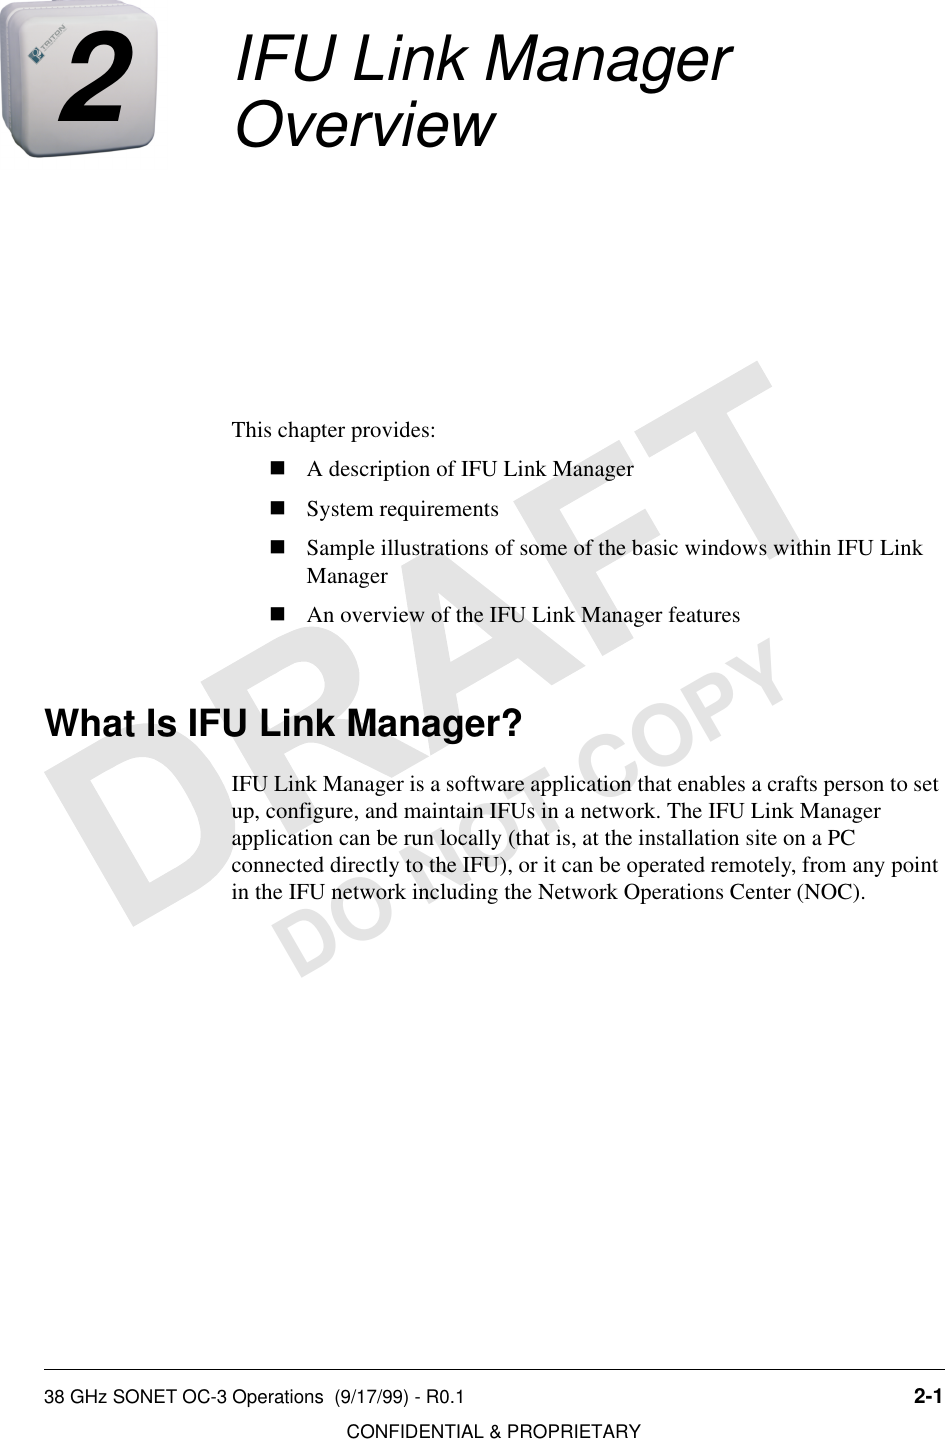 38 GHz SONET OC-3 Operations  (9/17/99) - R0.1 2-1CONFIDENTIAL &amp; PROPRIETARYDO NOT COPY2IFU Link Manager OverviewThis chapter provides:nA description of IFU Link ManagernSystem requirementsnSample illustrations of some of the basic windows within IFU Link ManagernAn overview of the IFU Link Manager featuresWhat Is IFU Link Manager?IFU Link Manager is a software application that enables a crafts person to set up, configure, and maintain IFUs in a network. The IFU Link Manager application can be run locally (that is, at the installation site on a PC connected directly to the IFU), or it can be operated remotely, from any point in the IFU network including the Network Operations Center (NOC).